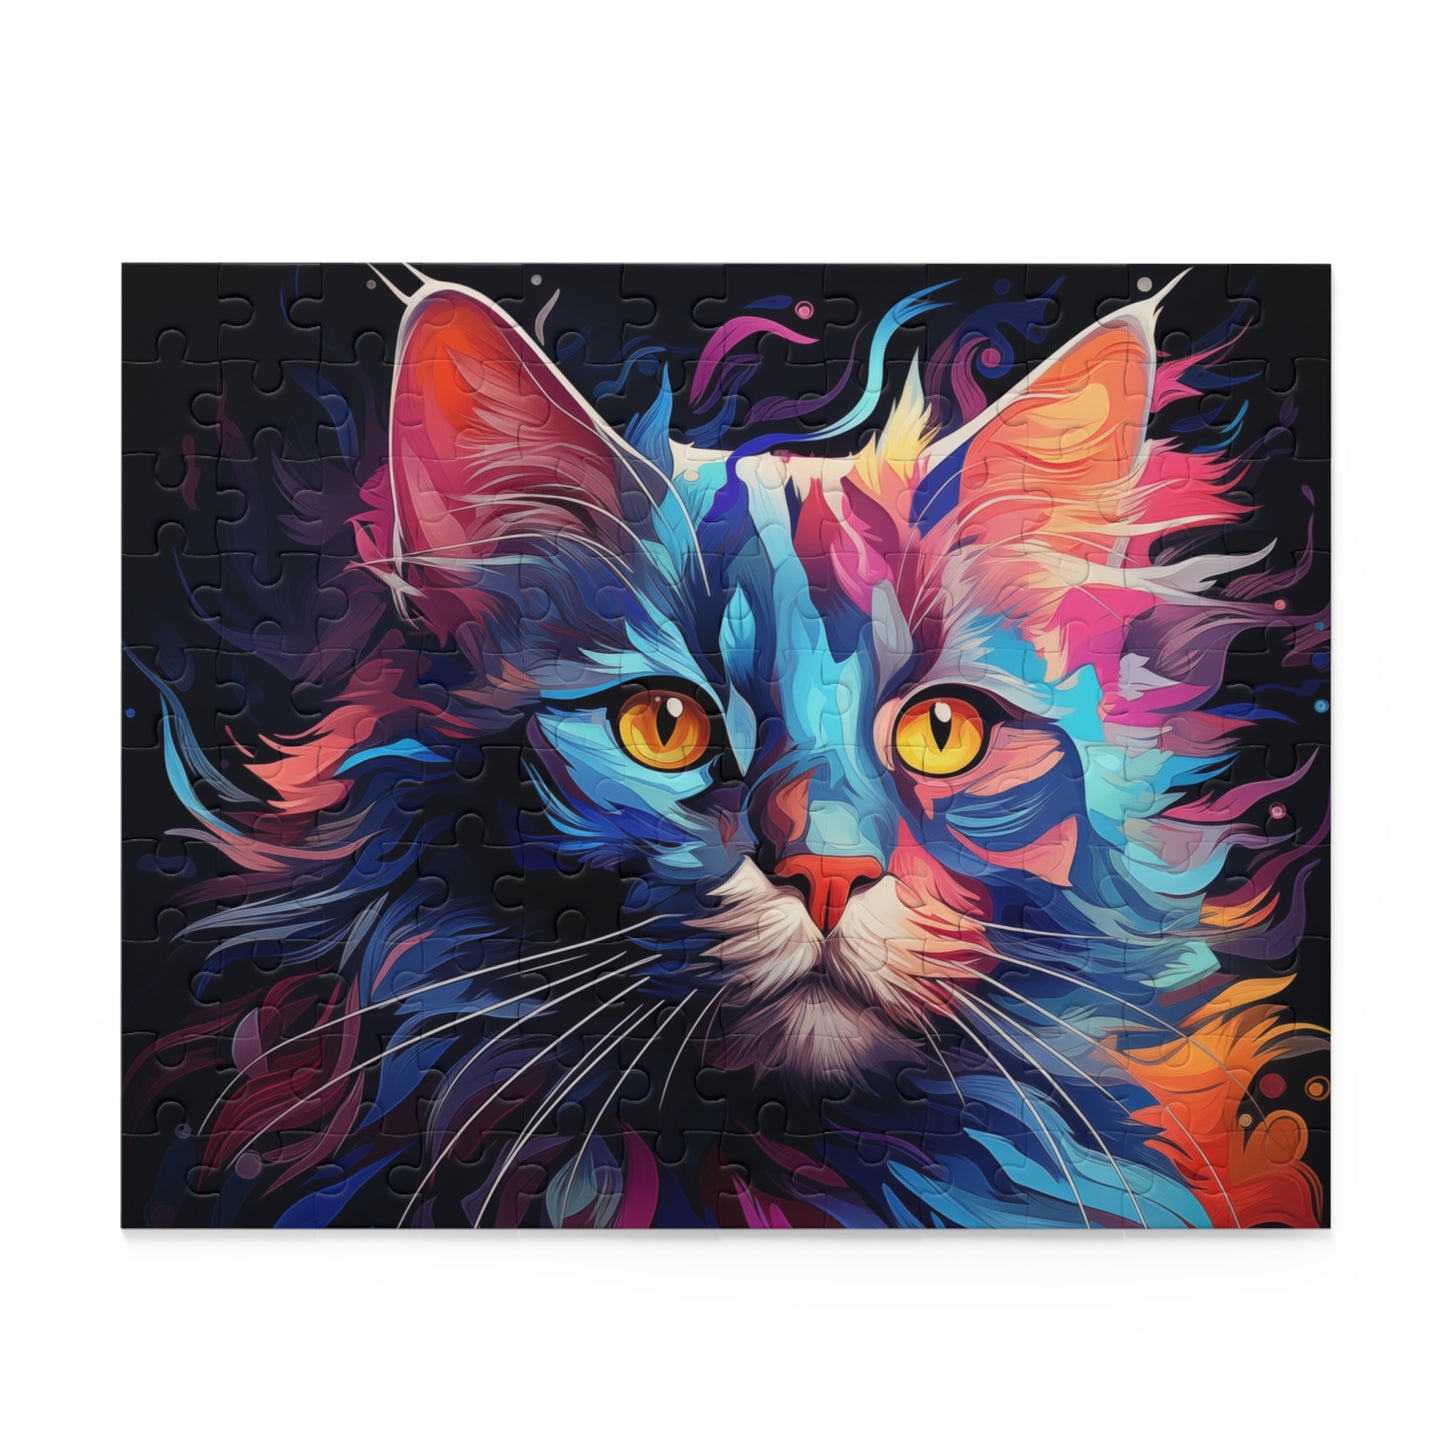 Copy of Abstract Cat Oil Paint Jigsaw Puzzle Adult Birthday Business Jigsaw Puzzle Gift for Him Funny Humorous Indoor Outdoor Game Gift For Her Online-2